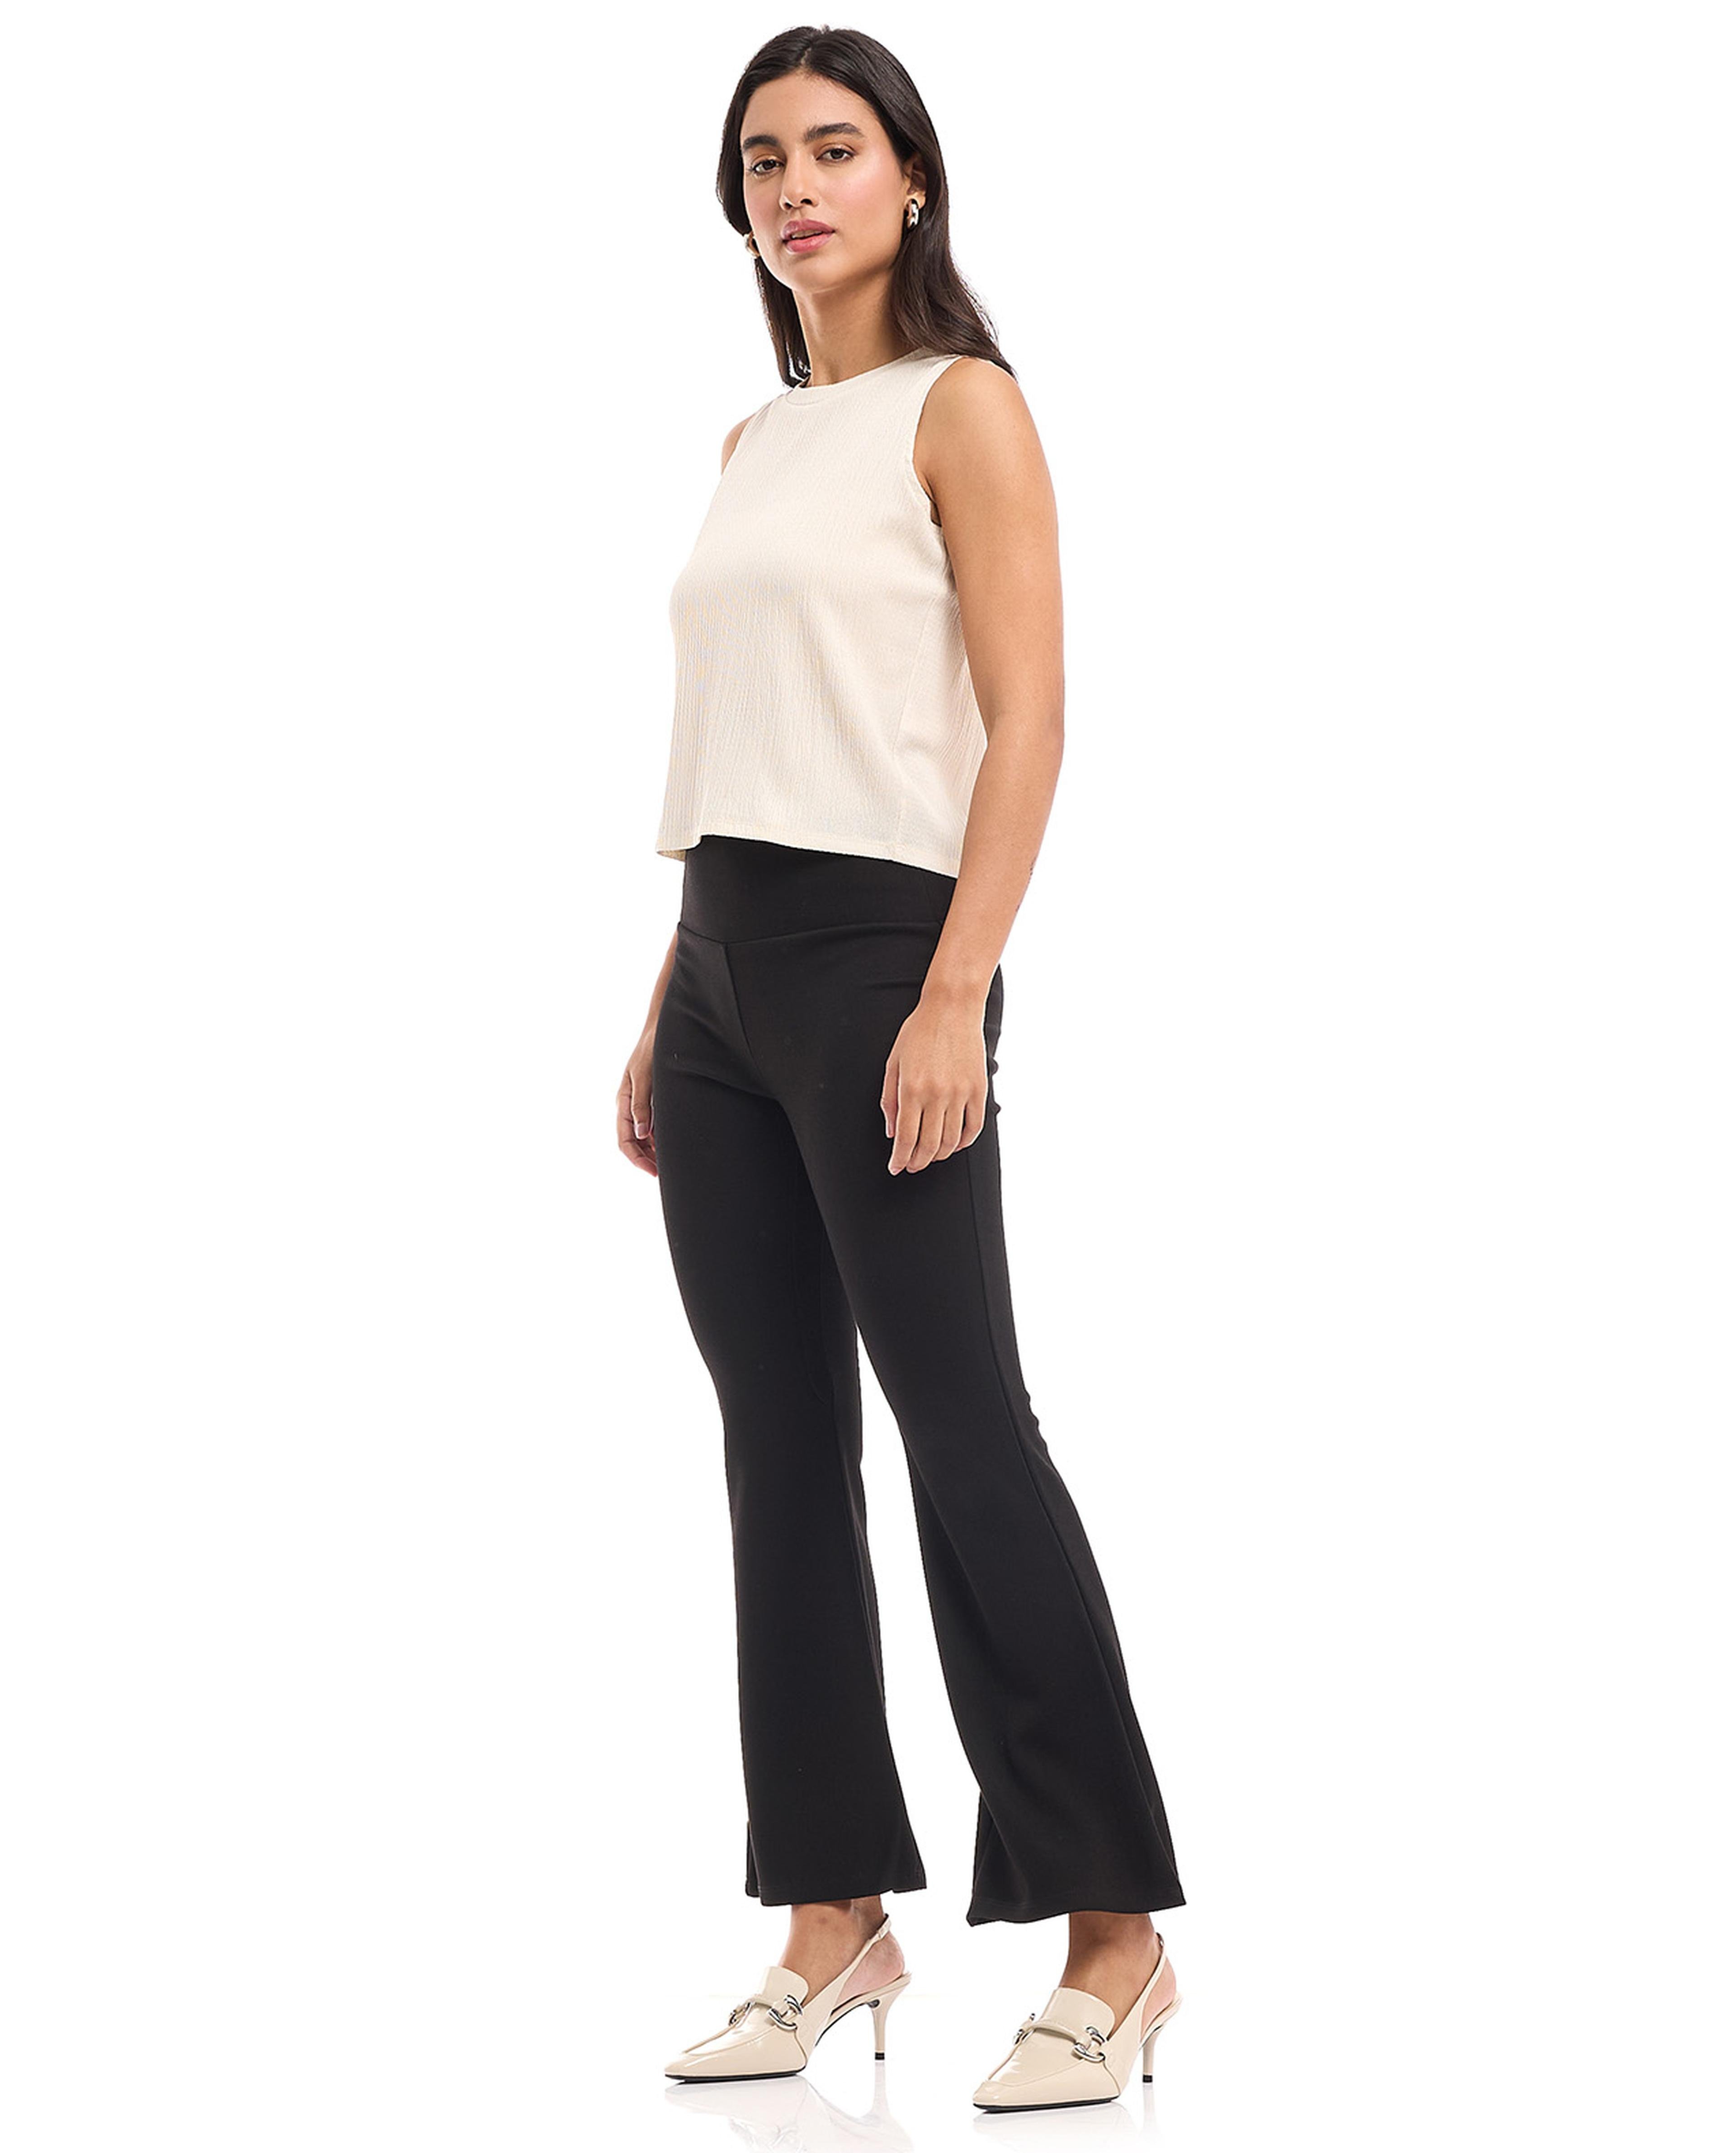 Solid Flared Pants with Elastic Waist